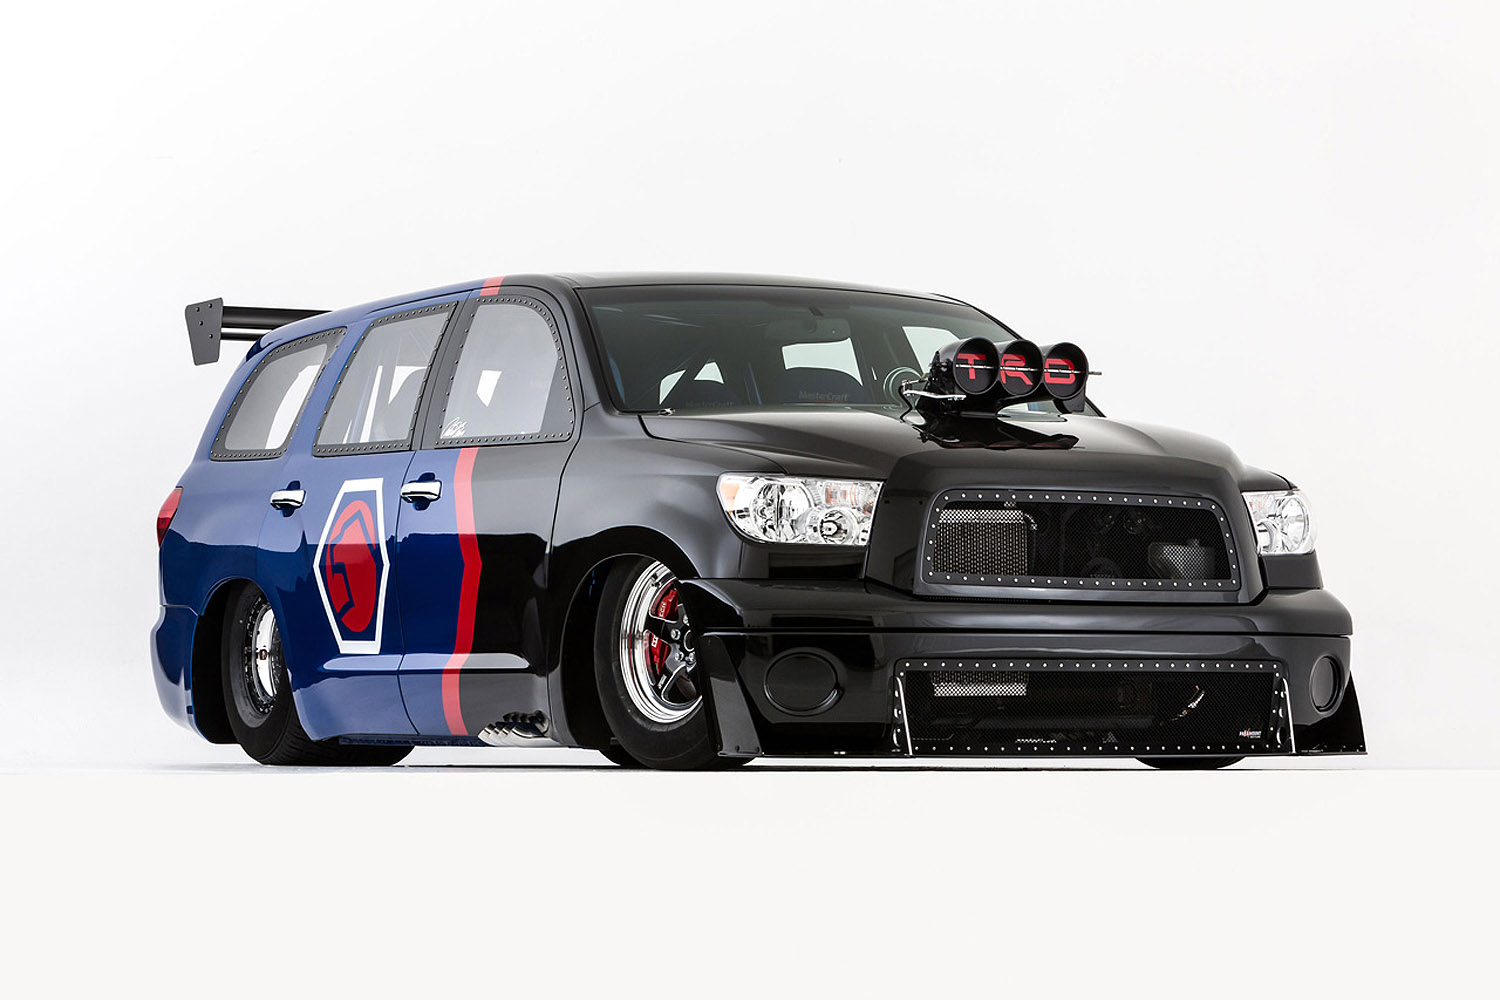 2012, Toyota, Dragquoia, Family, Sequoia, Dragster, Concept, Drag, Racing, Race, Hot, Rod, Rods Wallpaper